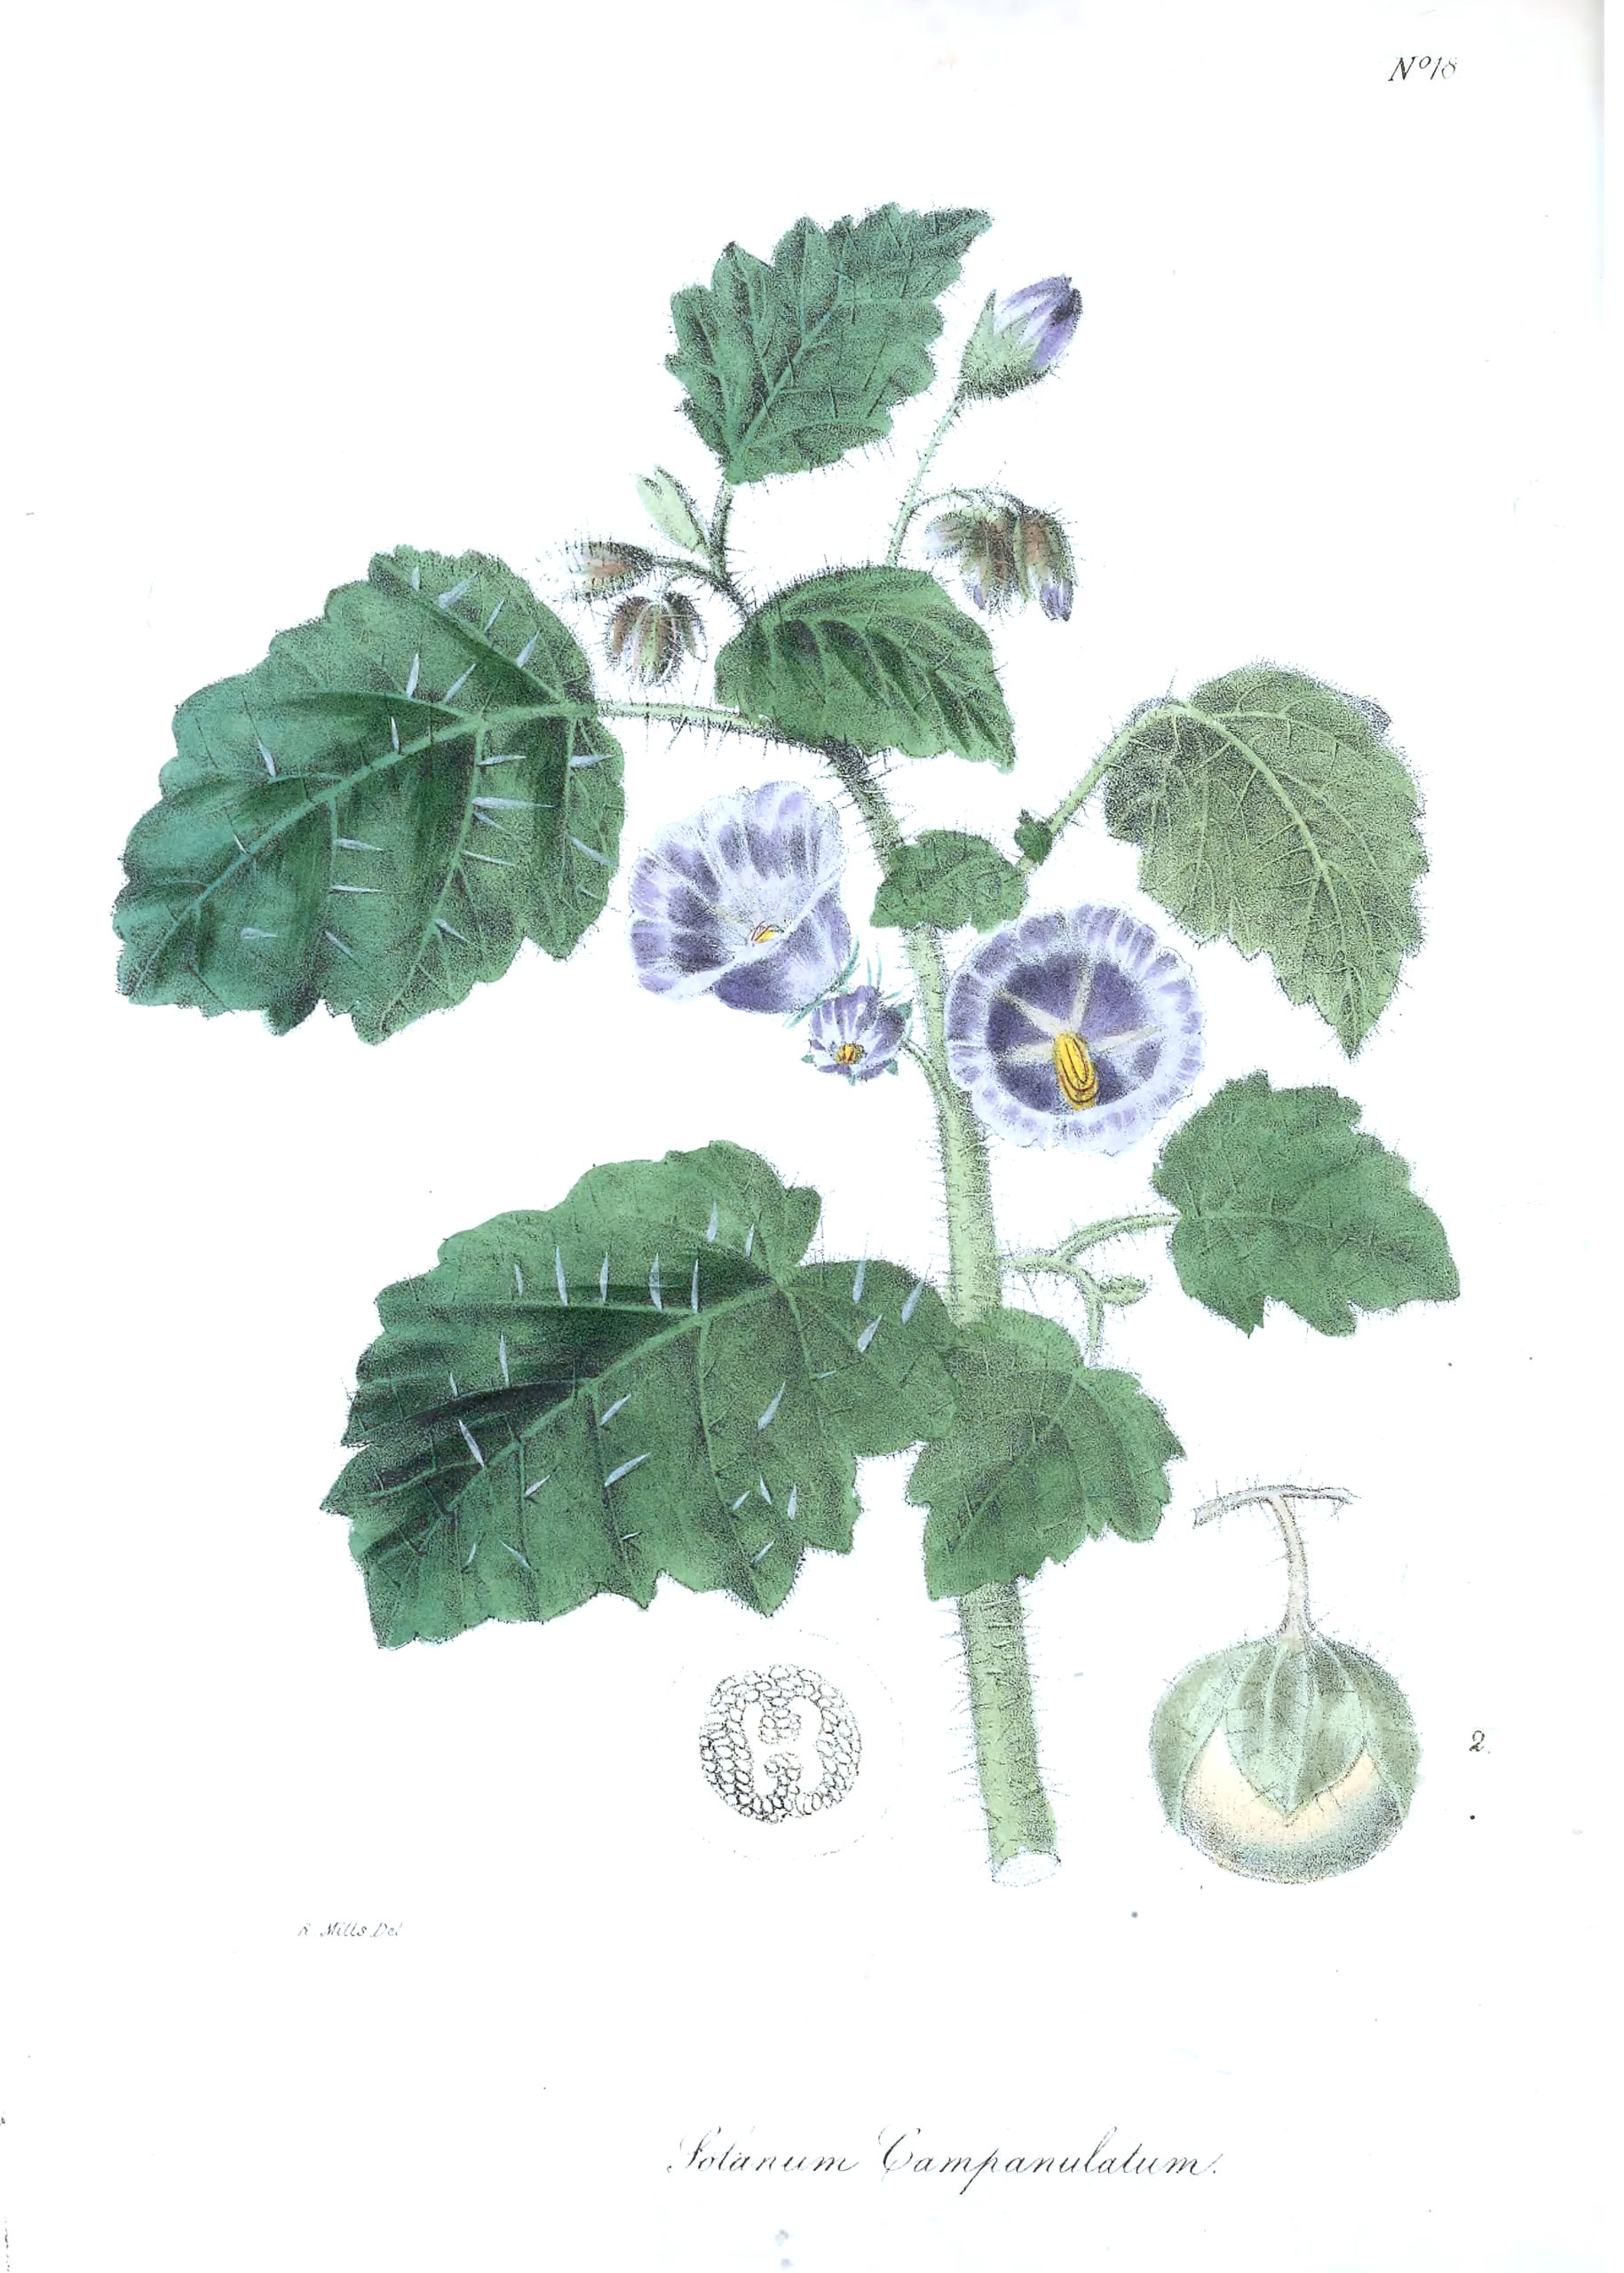 Vintage Botanical Print - 80 in a series - Solanum campanulatum from The floral cabinet and magazine of exotic botany (1837)